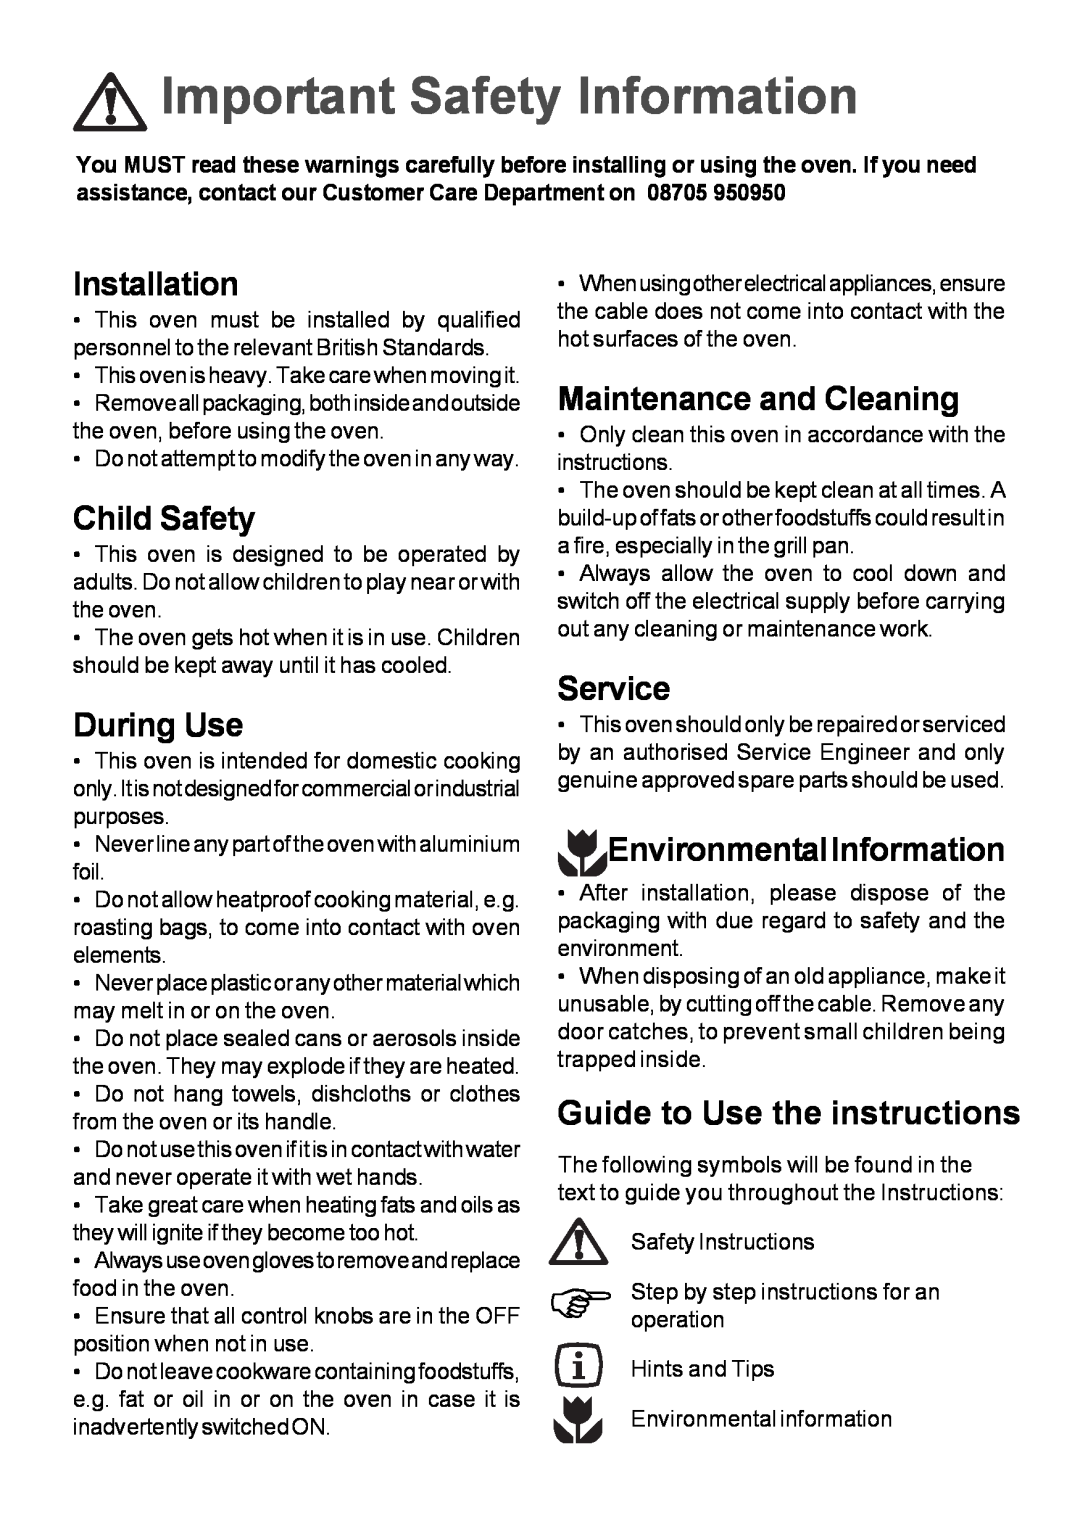 Moffat MSF 610 Important Safety Information, Installation, Child Safety, During Use, Maintenance and Cleaning, Service 